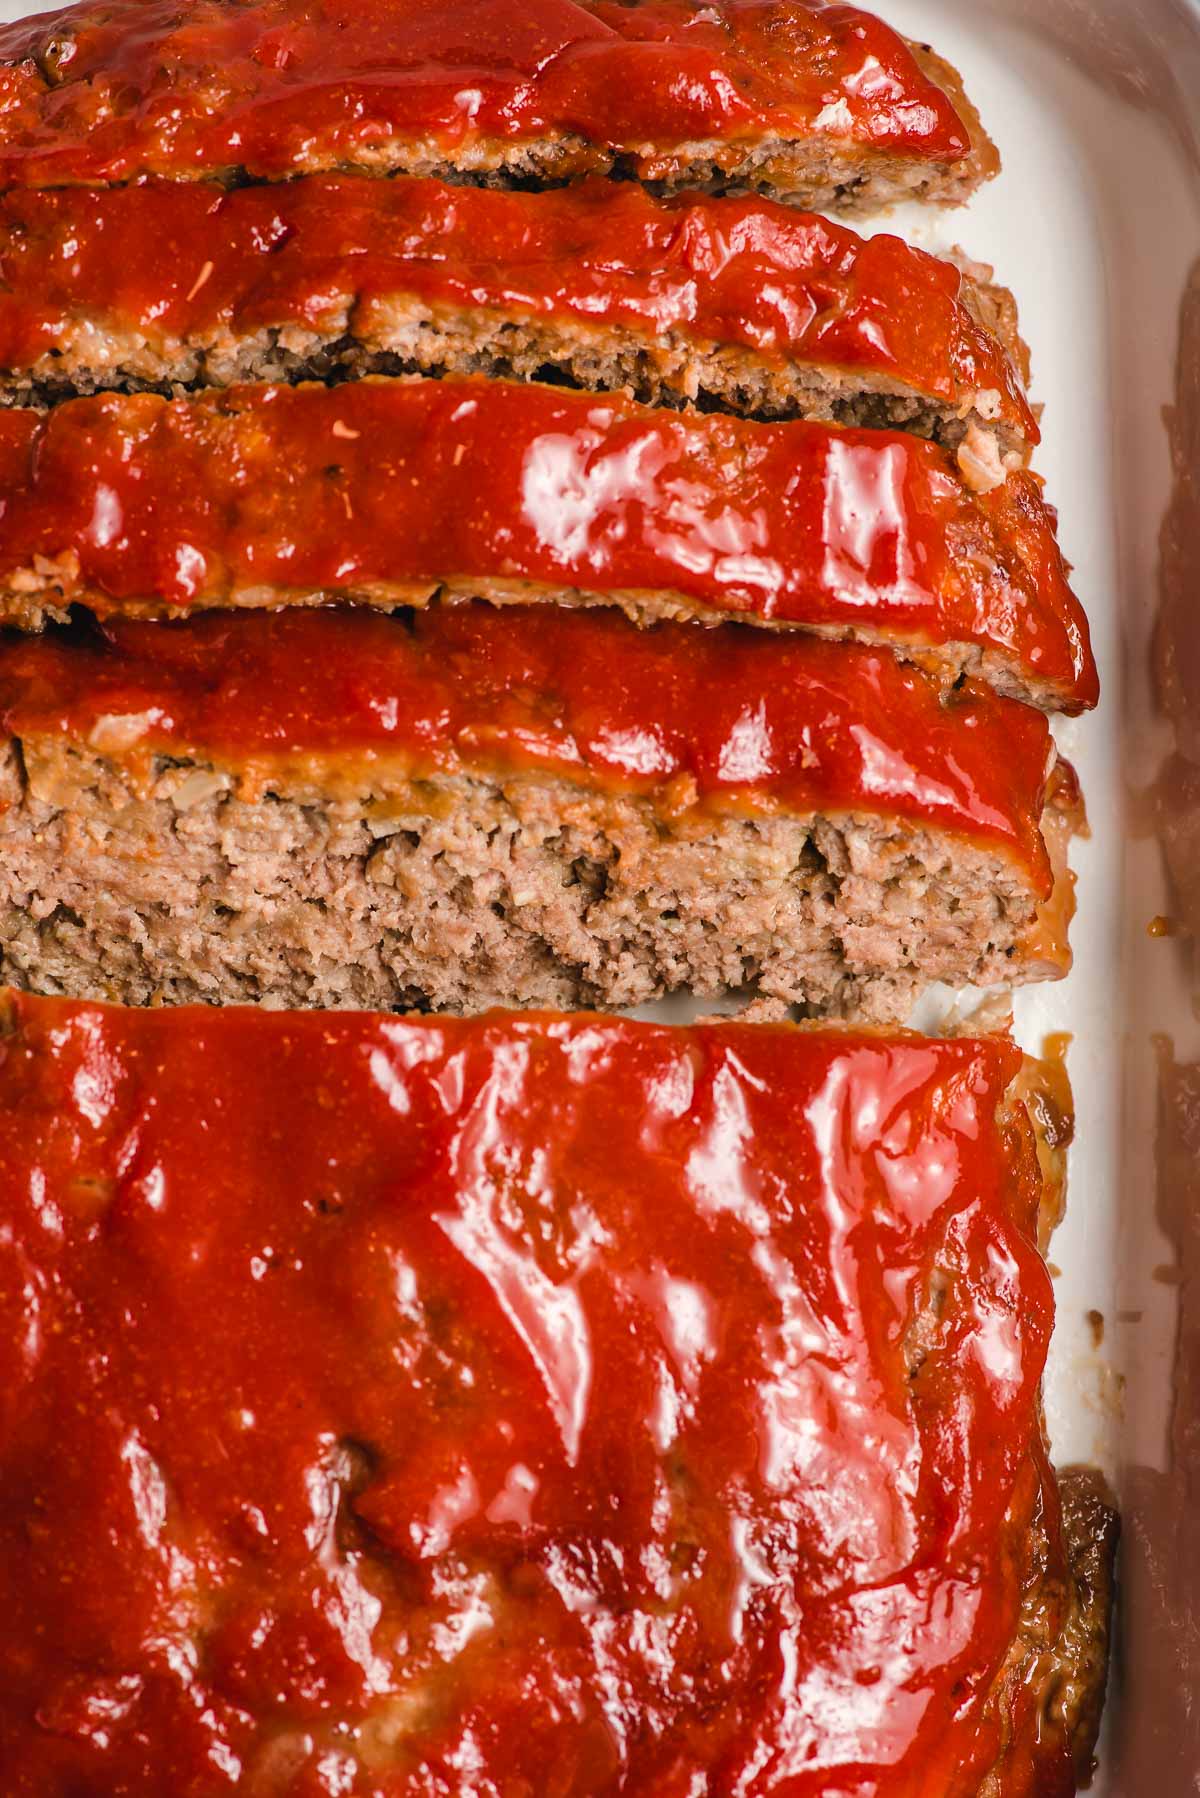 Easy meatloaf recipe shown baked and sliced in a casserole dish.